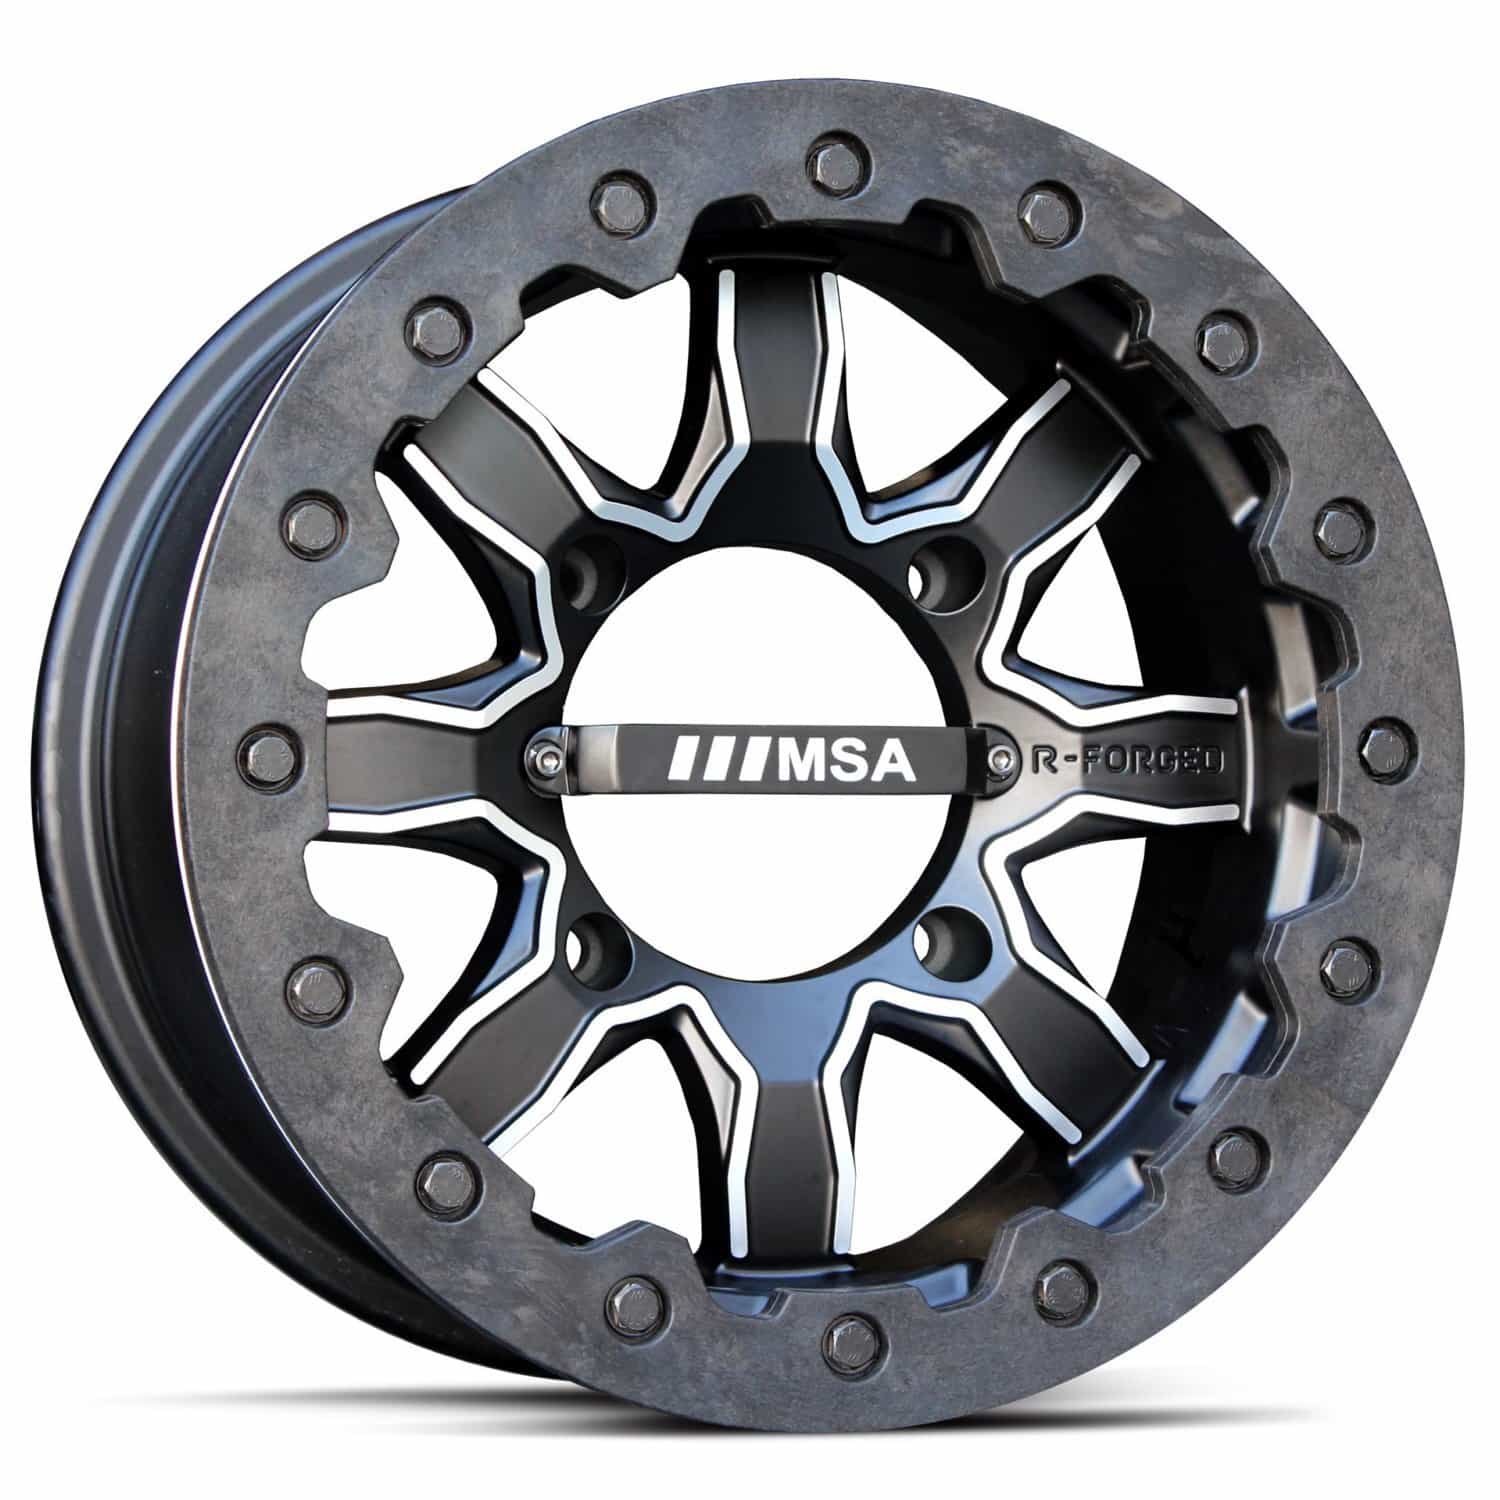 The MSA R-Forged F1 is a one-piece rotary forged aluminum beadlock UTV whee...